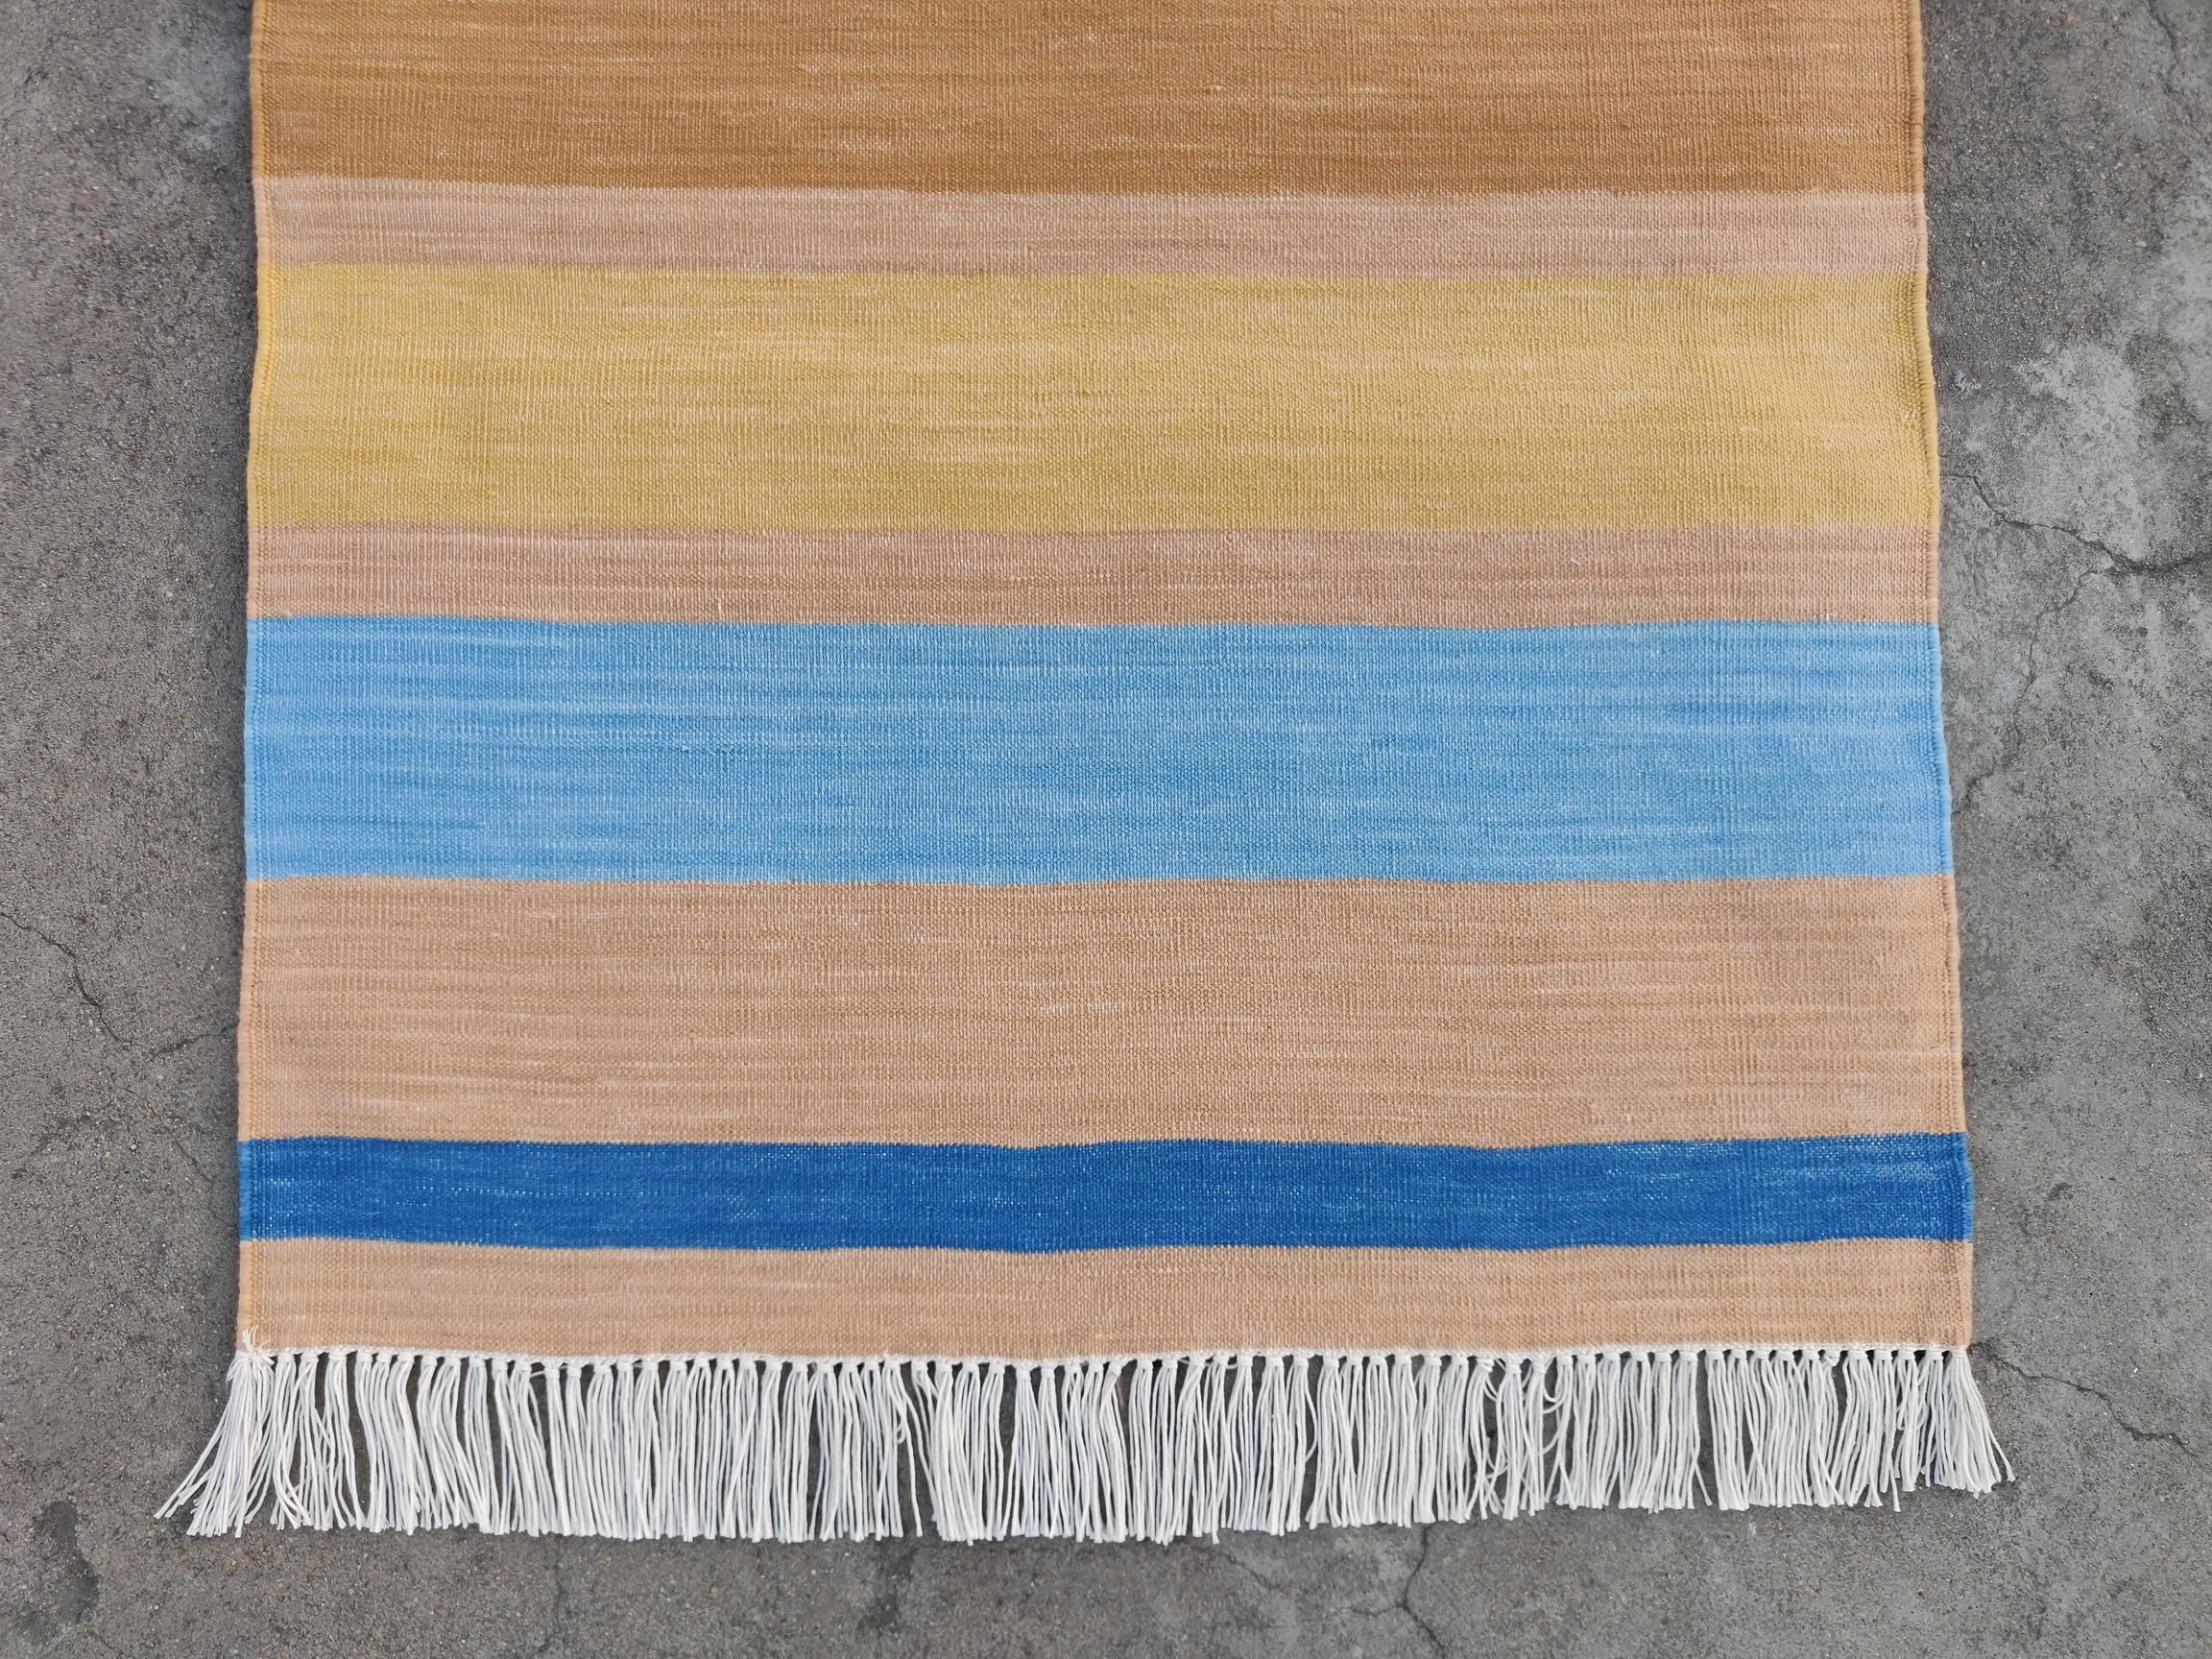 Handmade Cotton Area Flat Weave Rug, 6x9 Tan And White Striped Indian Dhurrie For Sale 3